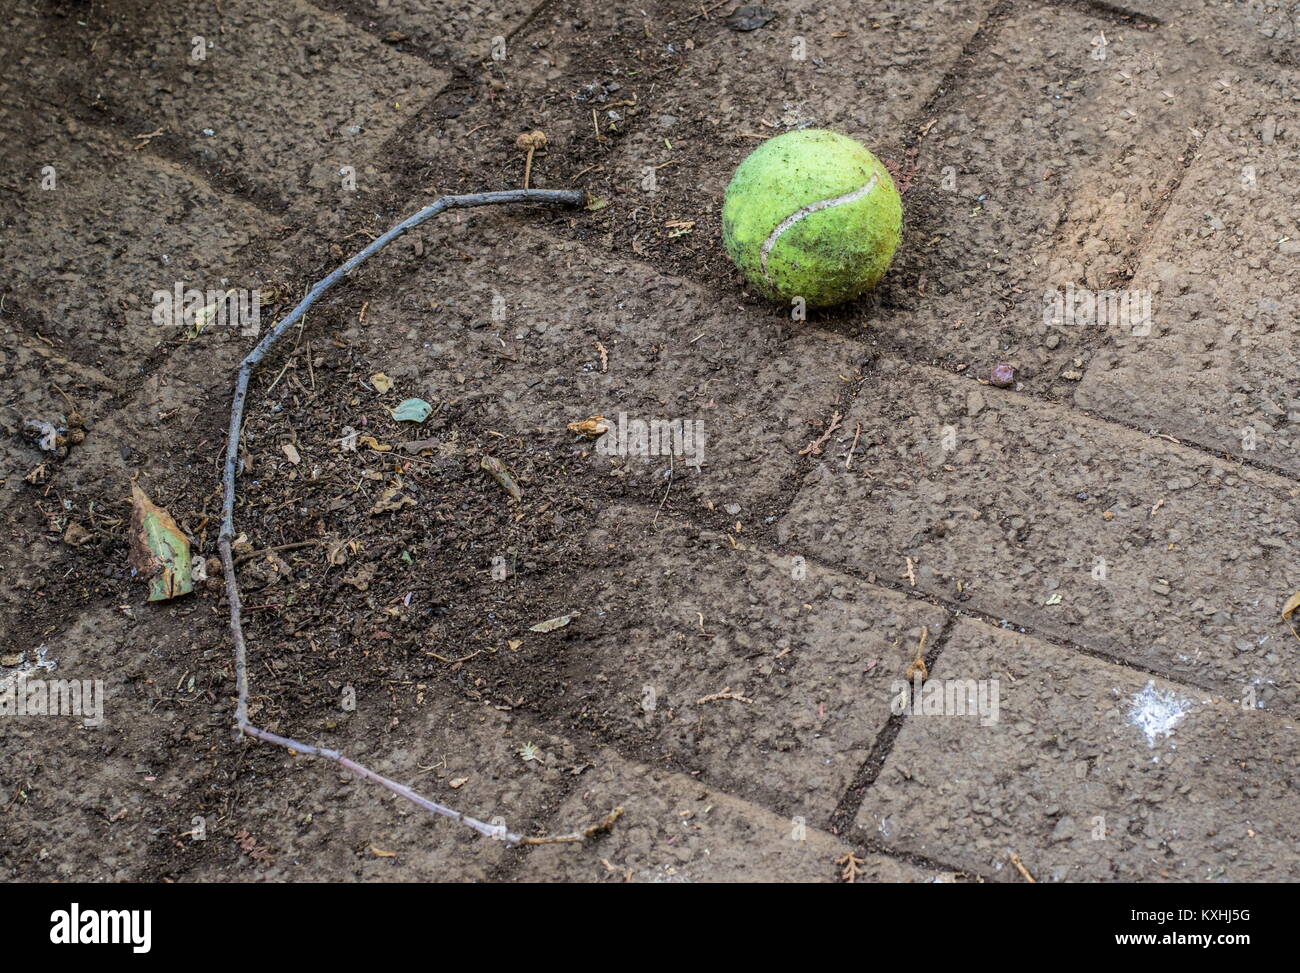 Abandoned green tennis ball and a dry bent twig on dusty and dirty paving Stock Photo